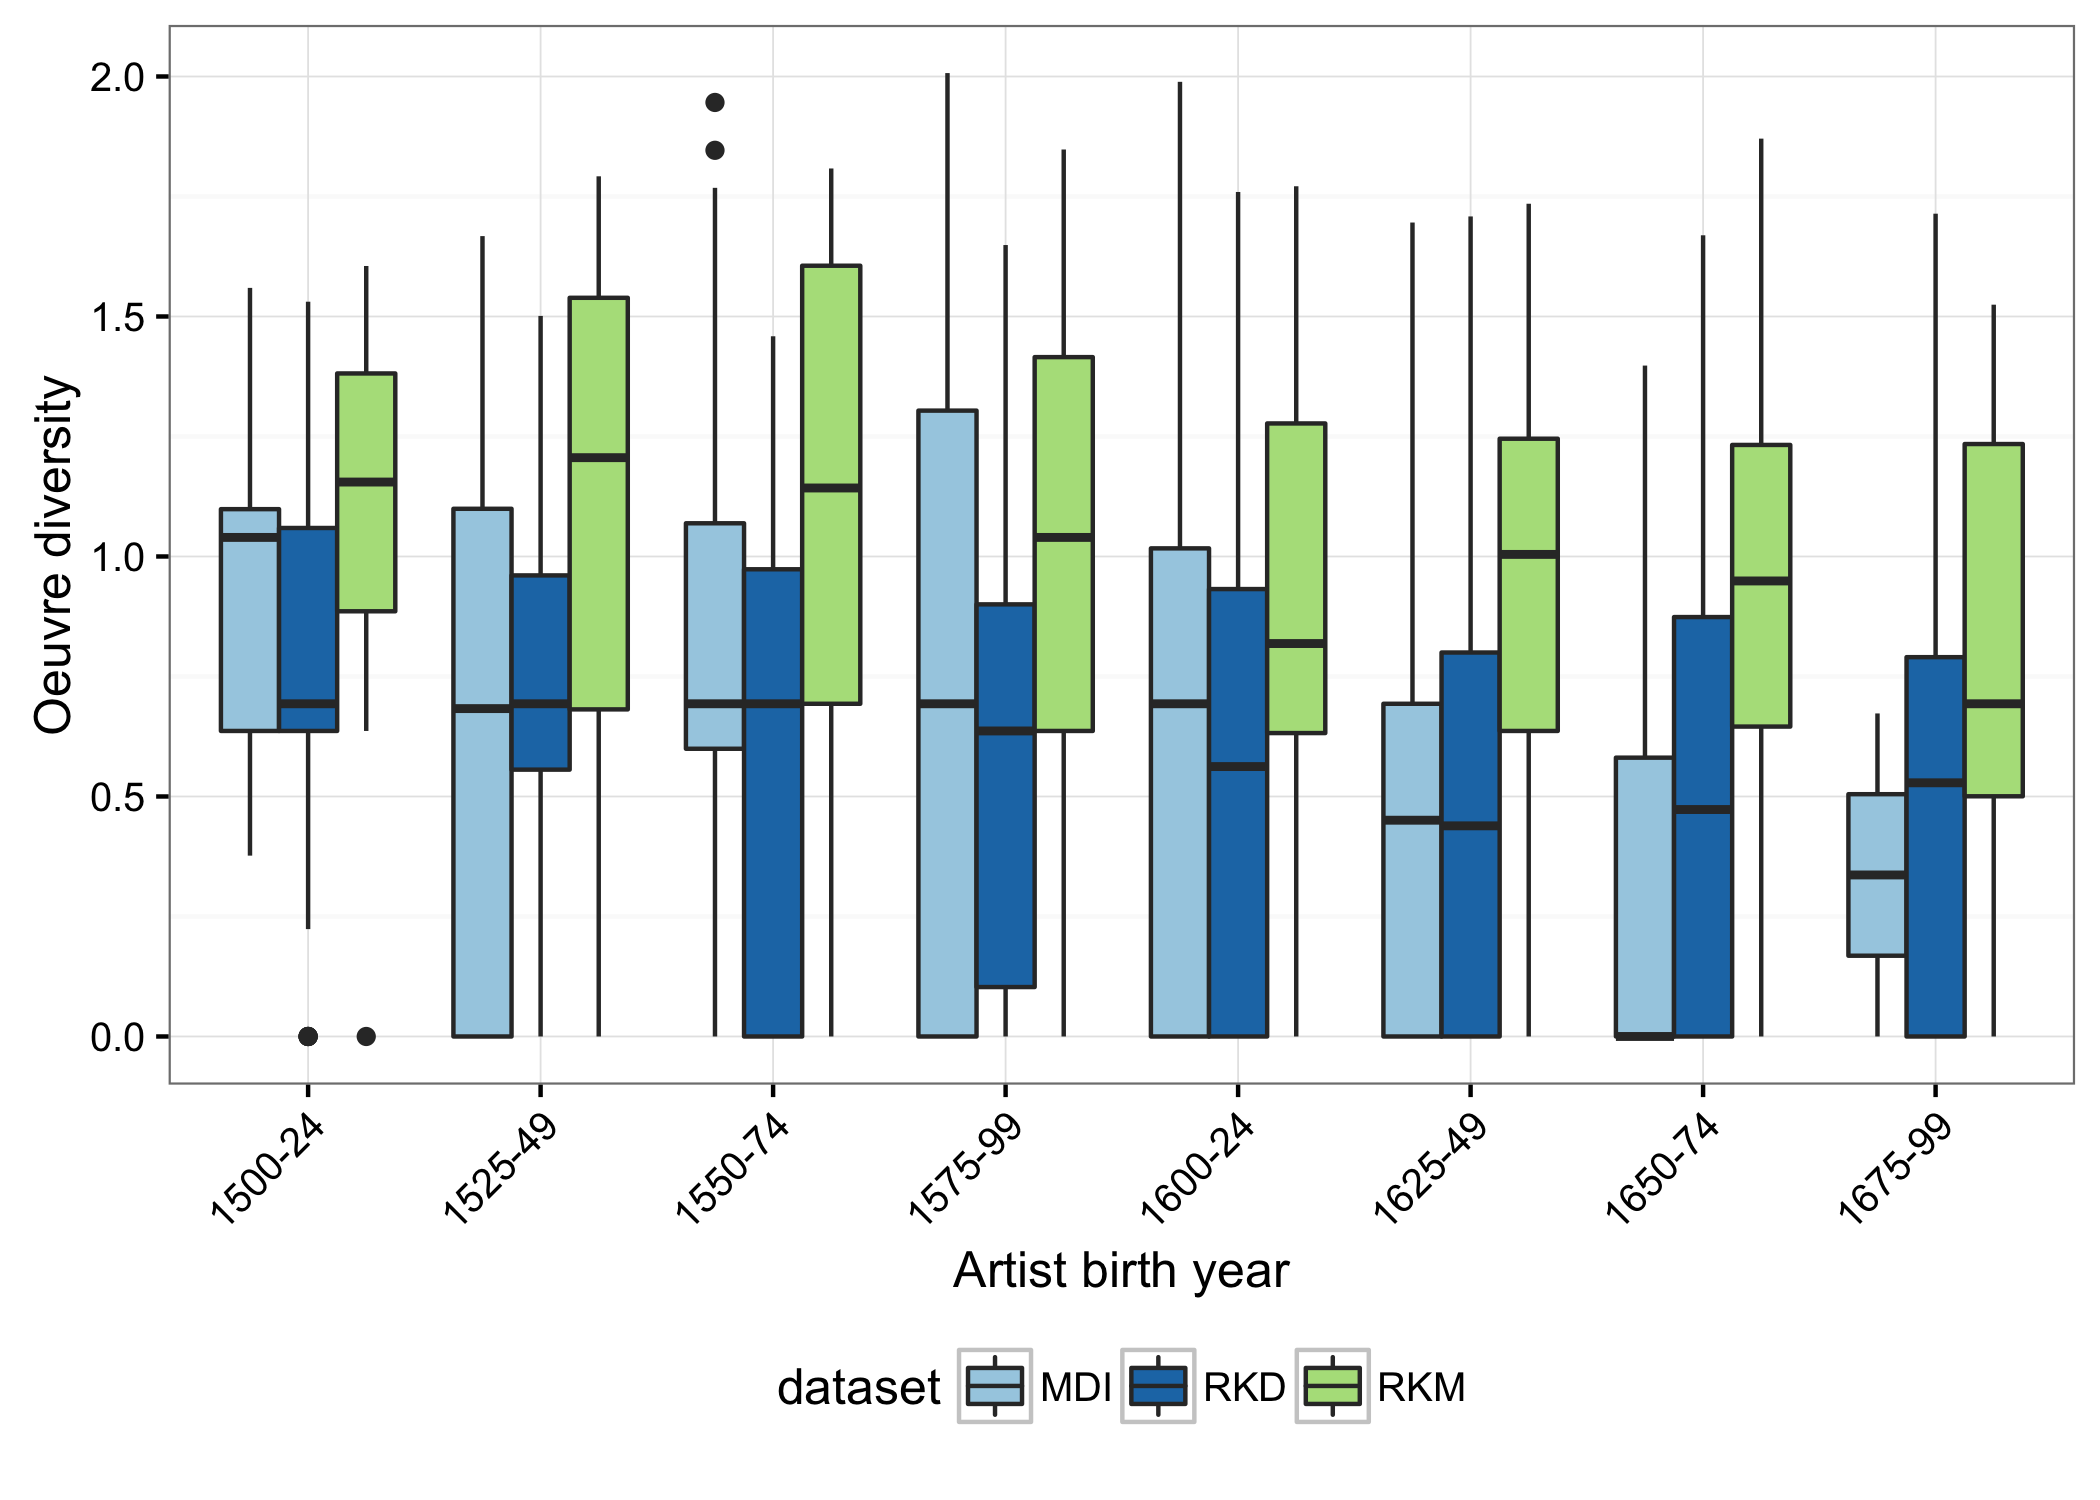 Figure The oeuvre diversity ranges of painters (Montias and RKD datasets) and printmakers (RKM dataset) born at different points between 1500 and 1700